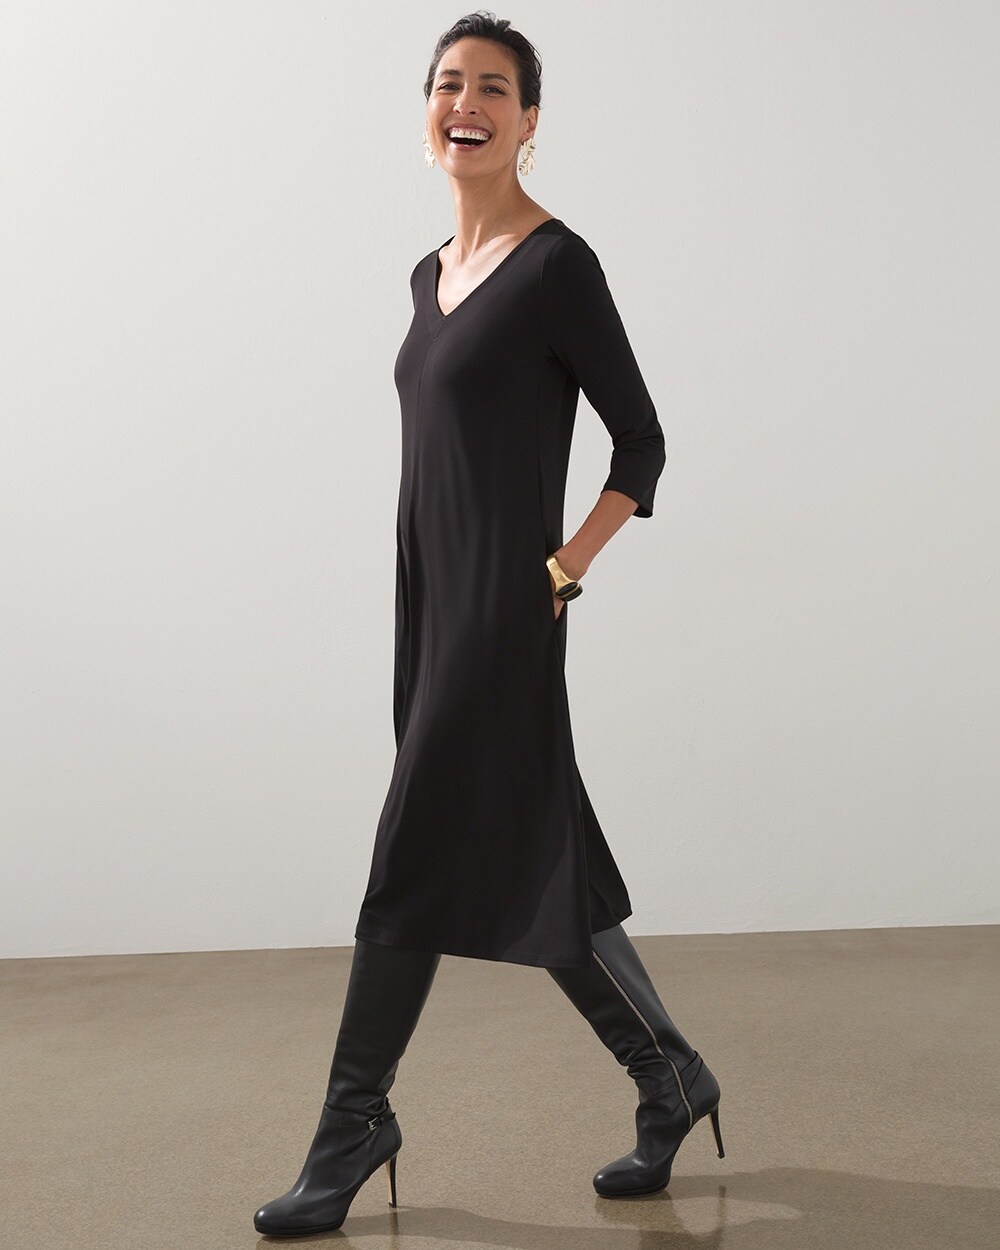 3/4 Sleeve V-neck Midi Dress video preview image, click to start video